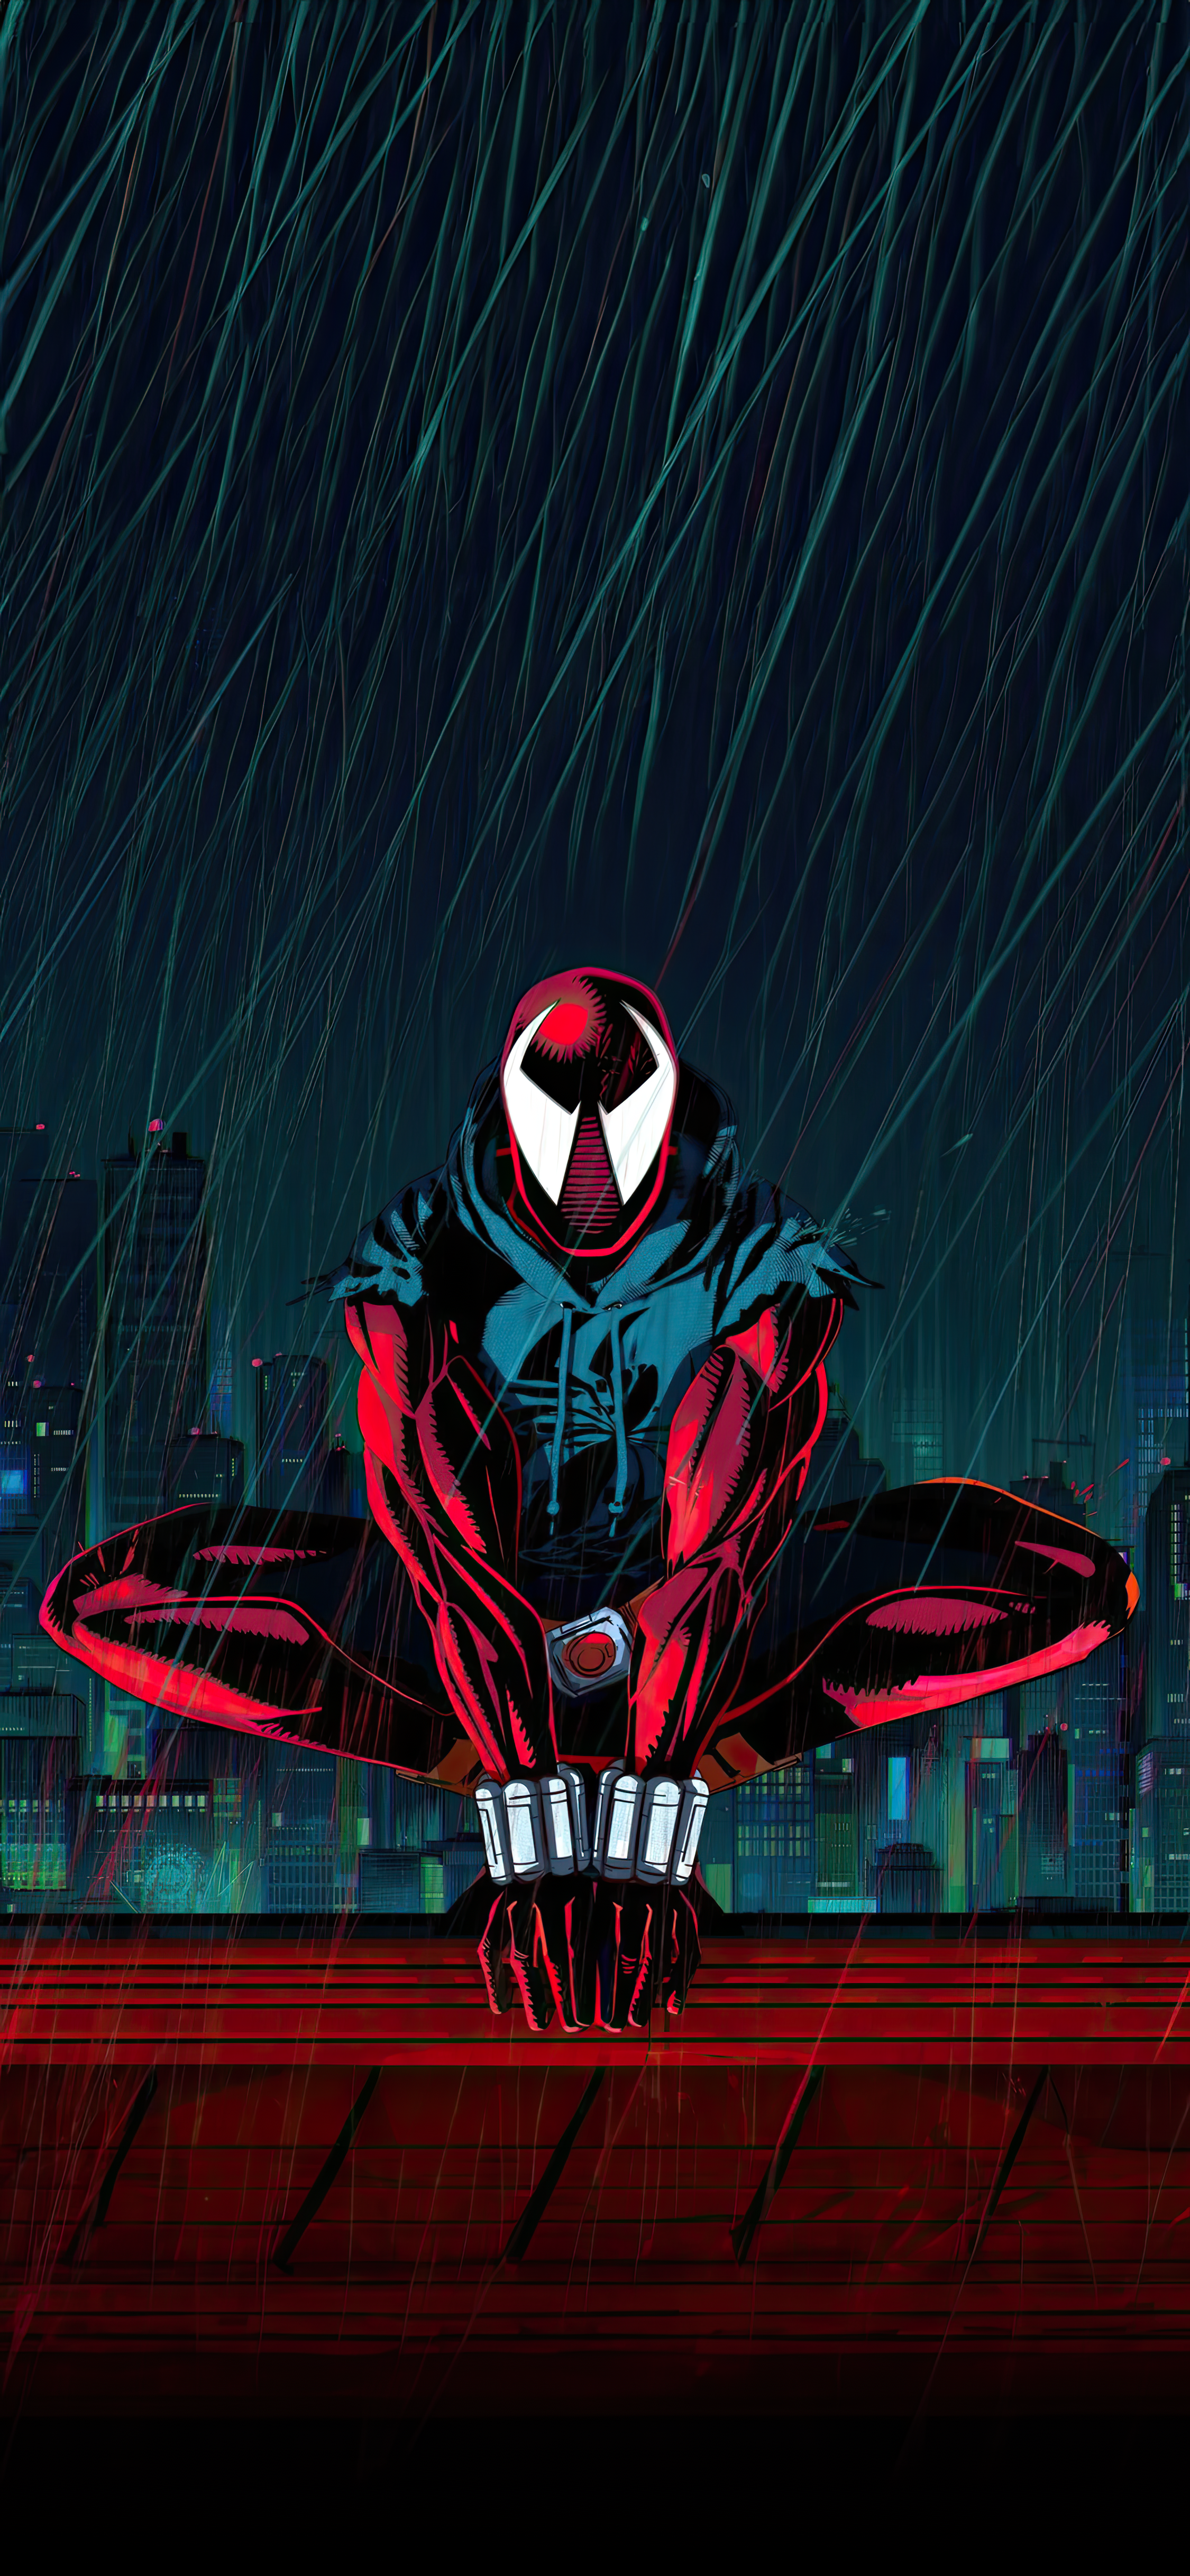 Converted The Across The Spider Verse Ben Reilly Poster Into A Mobile Wallpaper